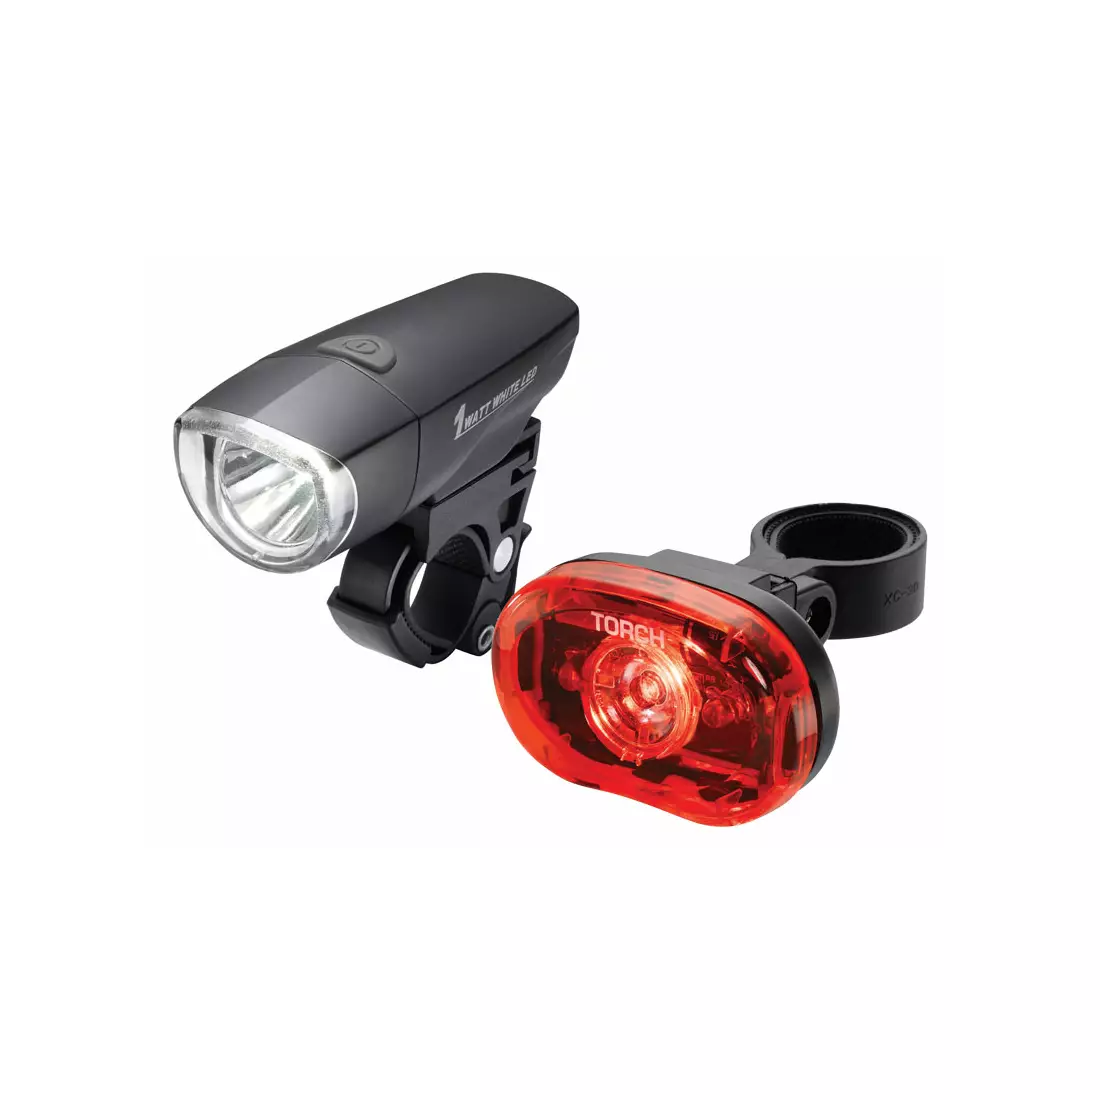 Lamp set TORCH CYCLE LIGHT SET HIGH BEAMER COMPACT 1W + TAIL BRIGHT 0.5W TOR-54038